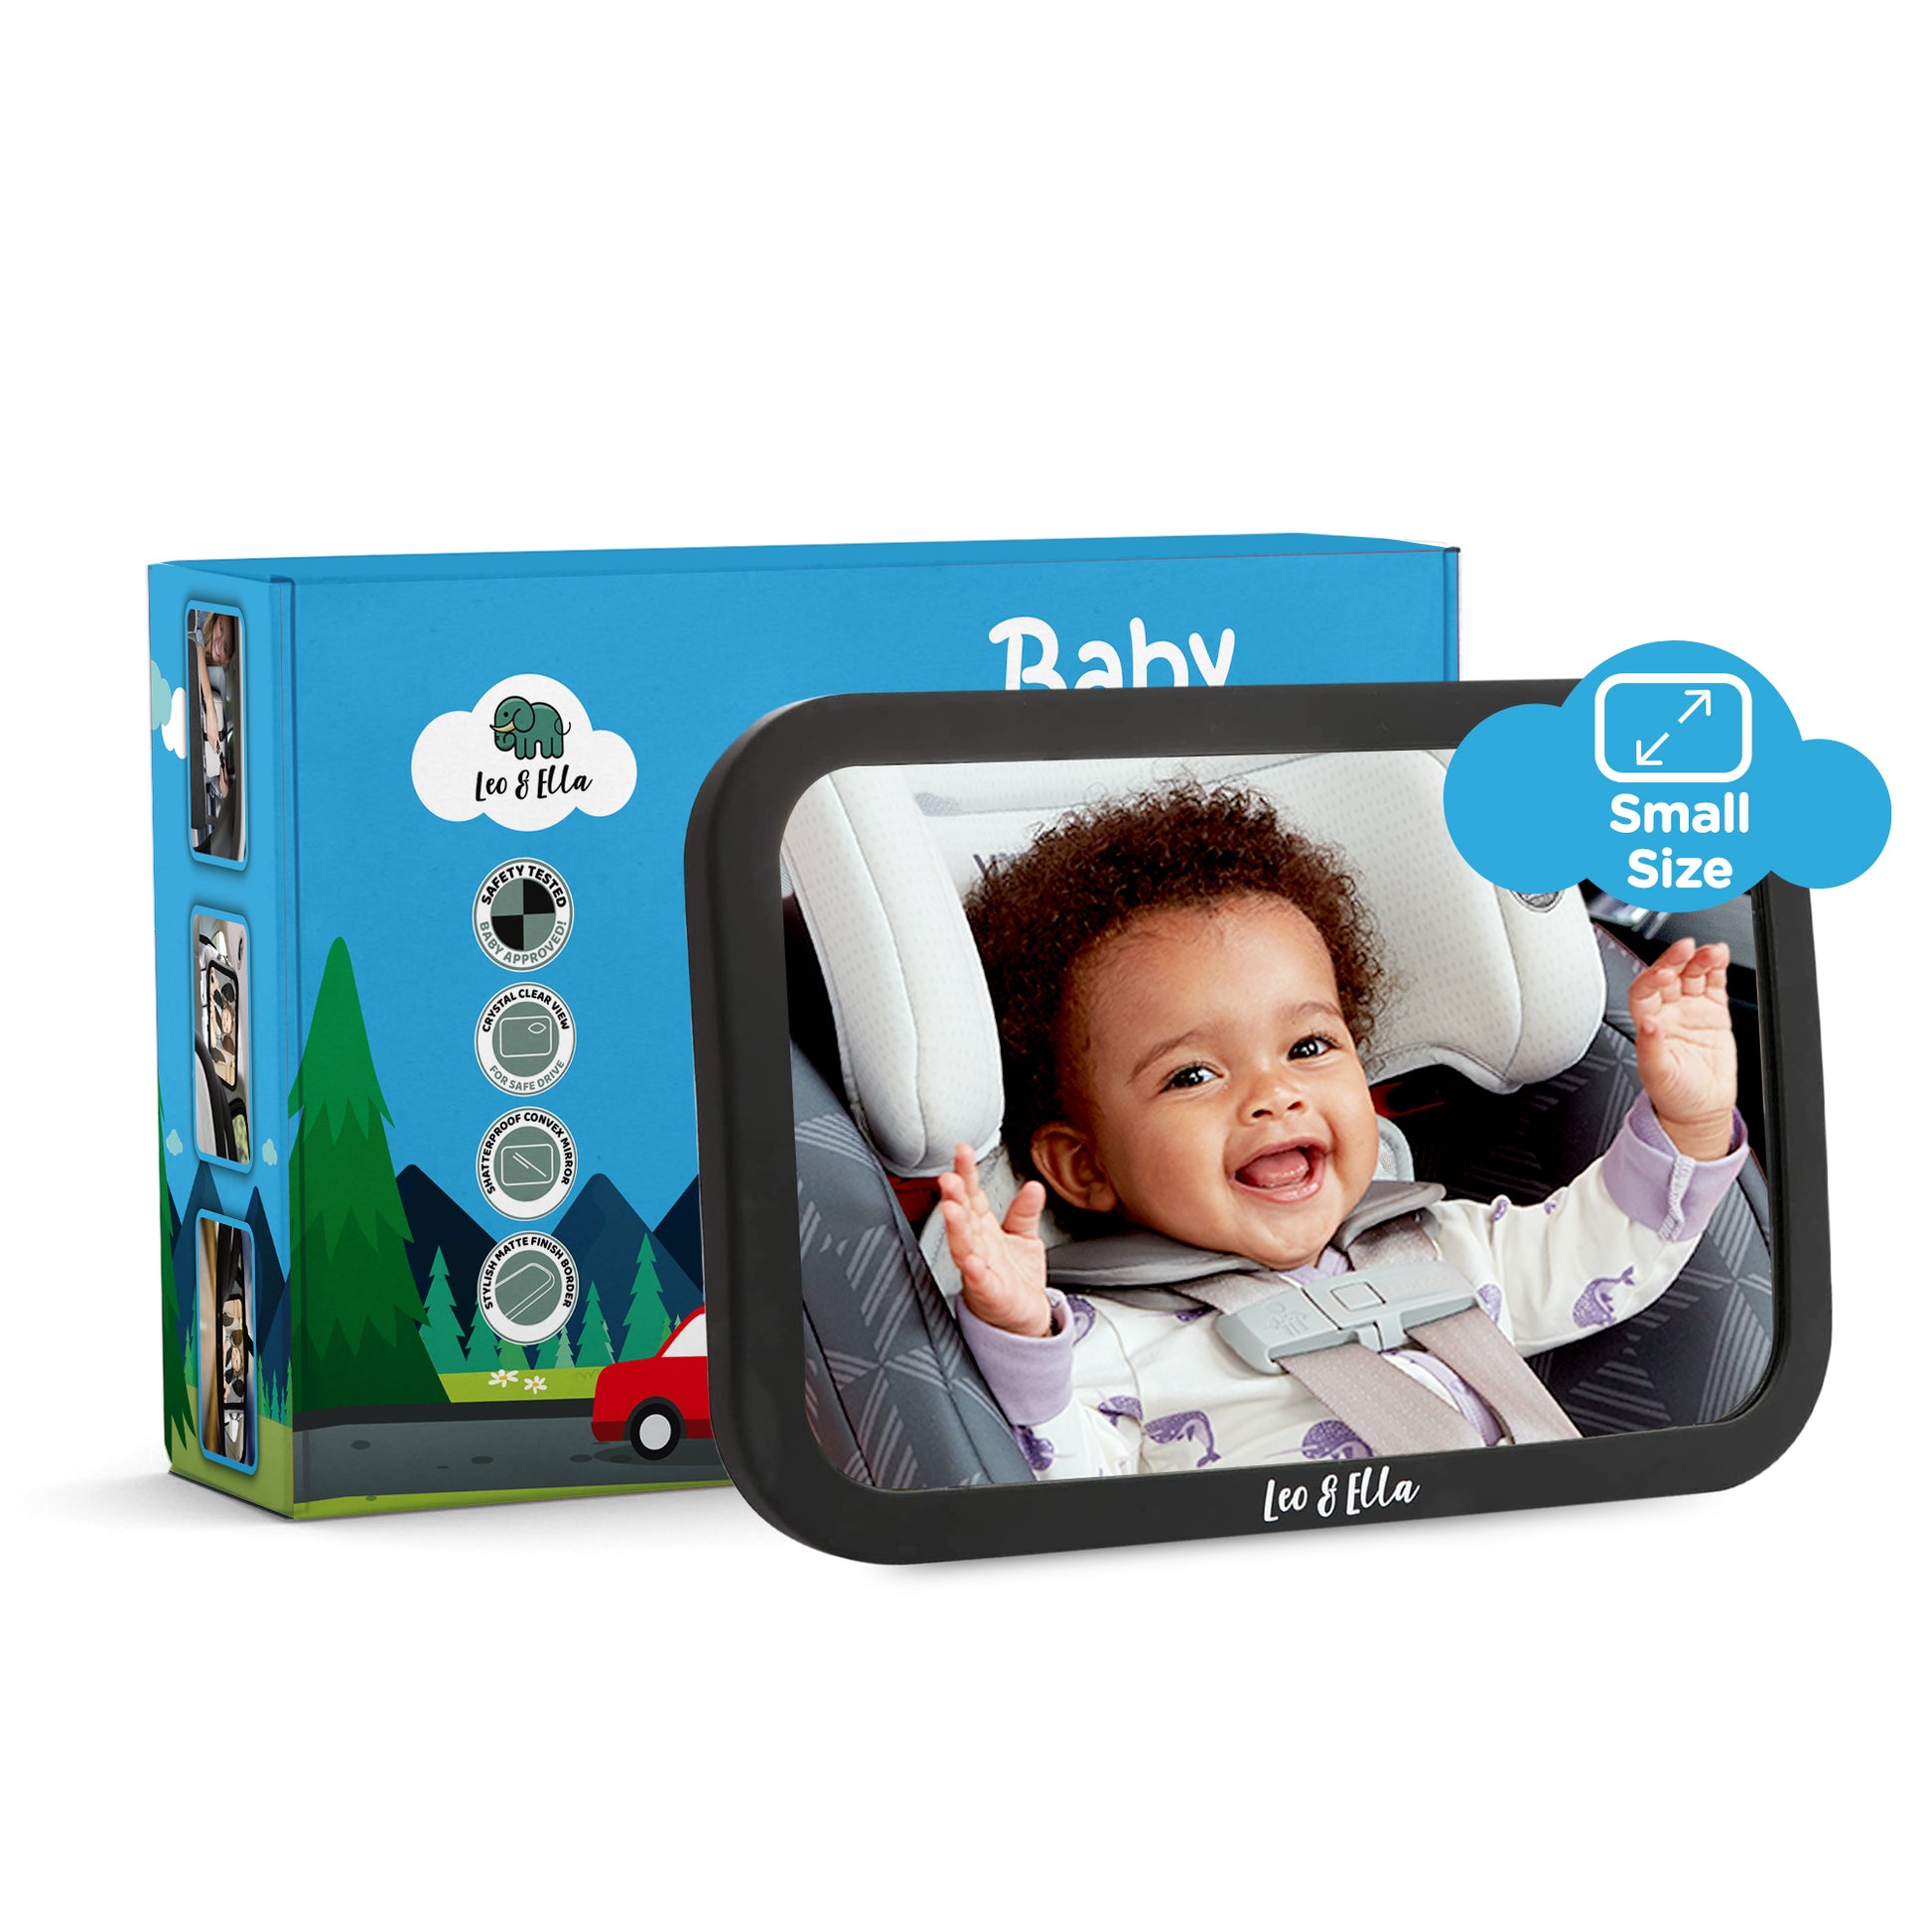 Leo&Ella Large Baby Car Mirror Safety First, Certified Crash Tested